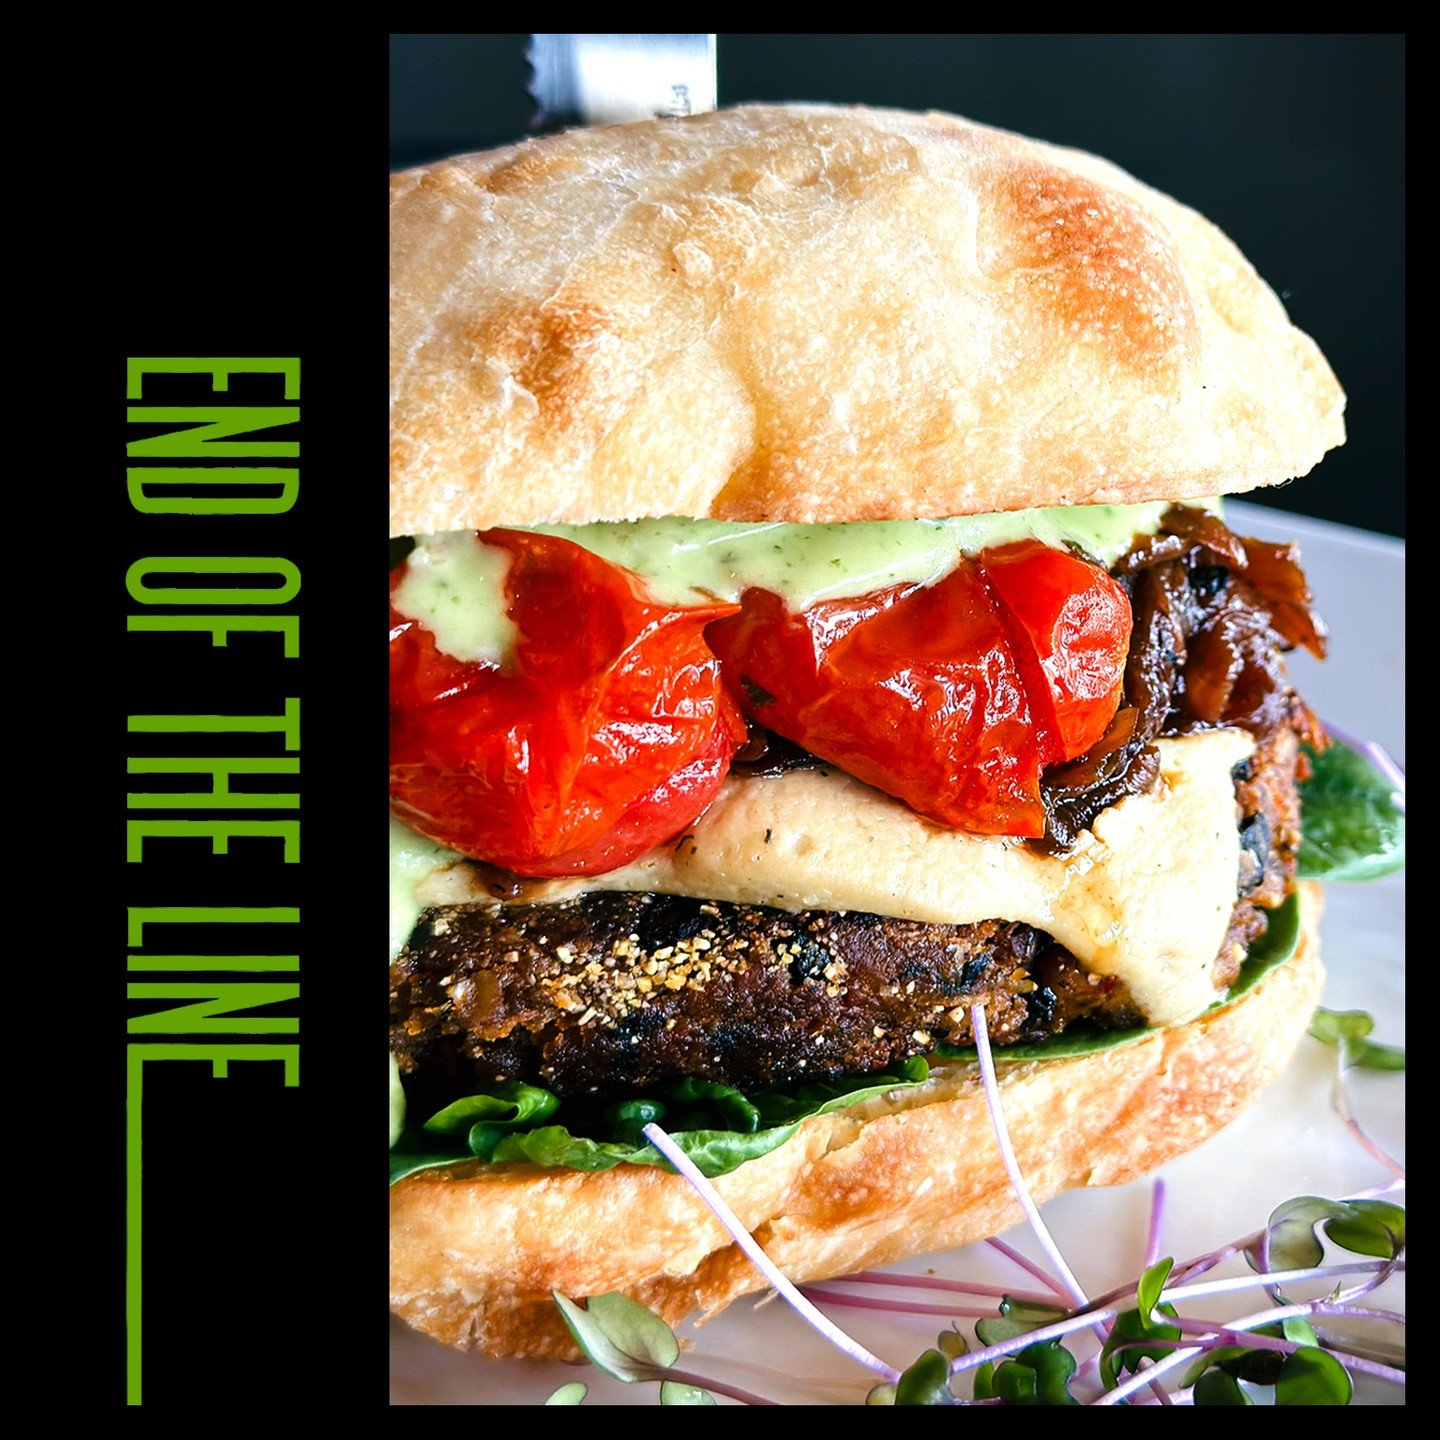 Ciao Baby Burger
House made Italian sausage burger, with rosemary roasted grape tomatoes, grilled onions, pesto aioli, roasted garlic, mozzarella, and fresh spinach, on a toasted ciabatta roll.

#saucyvegans #gulfcoastvegans #bbqvegan #downtownpensac